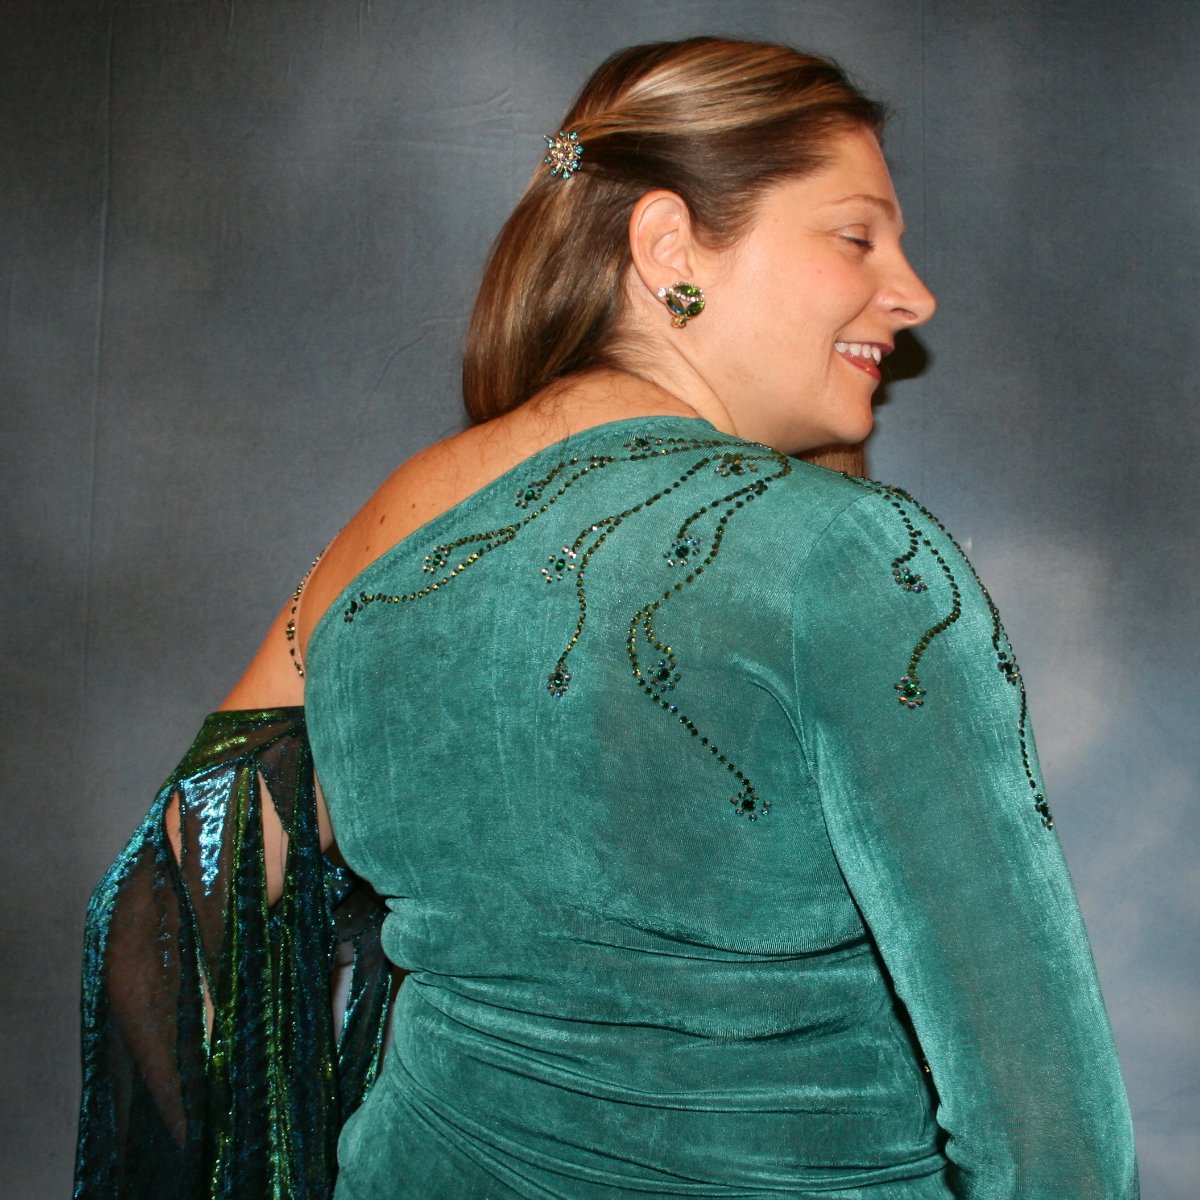 Crystal's Creations upper back view of Plus size teal Latin/rhythm dress or tango dress was created in luxurious teal solid slinky with iridescent floats & flounces plus a few champagne sequined flounces at bottom skirting. It is embellished with finely detailed Swarovski stonework in blue zircon, blue zircon AB and emerald green